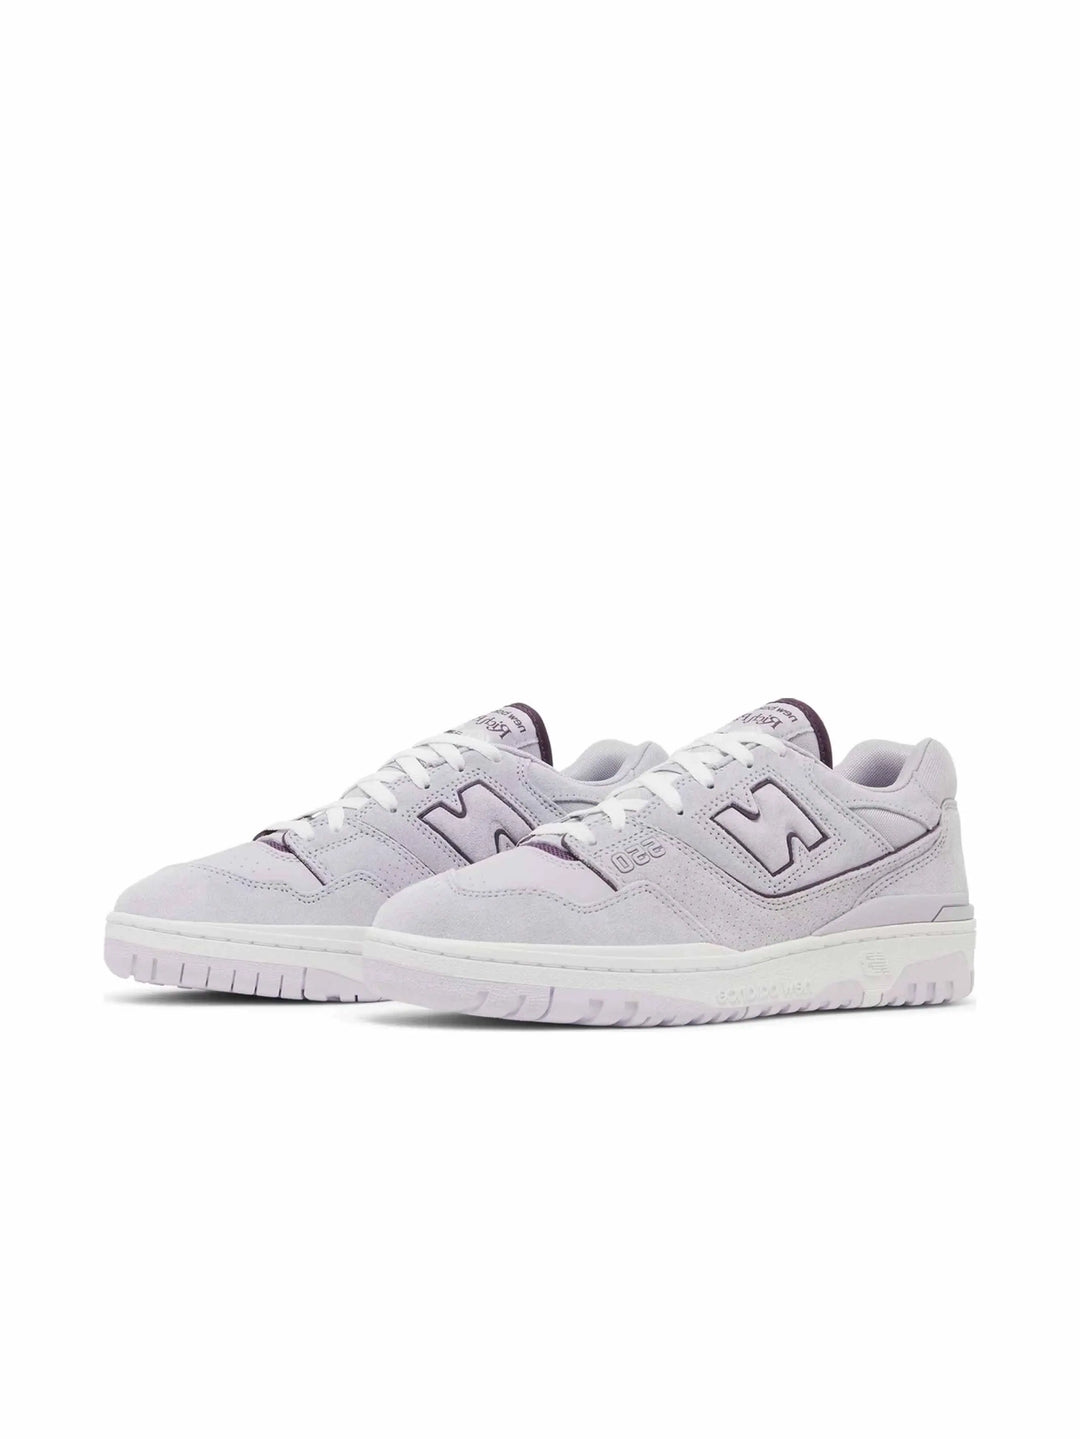 New Balance 550 Rich Paul Forever Yours in Auckland, New Zealand - Shop name